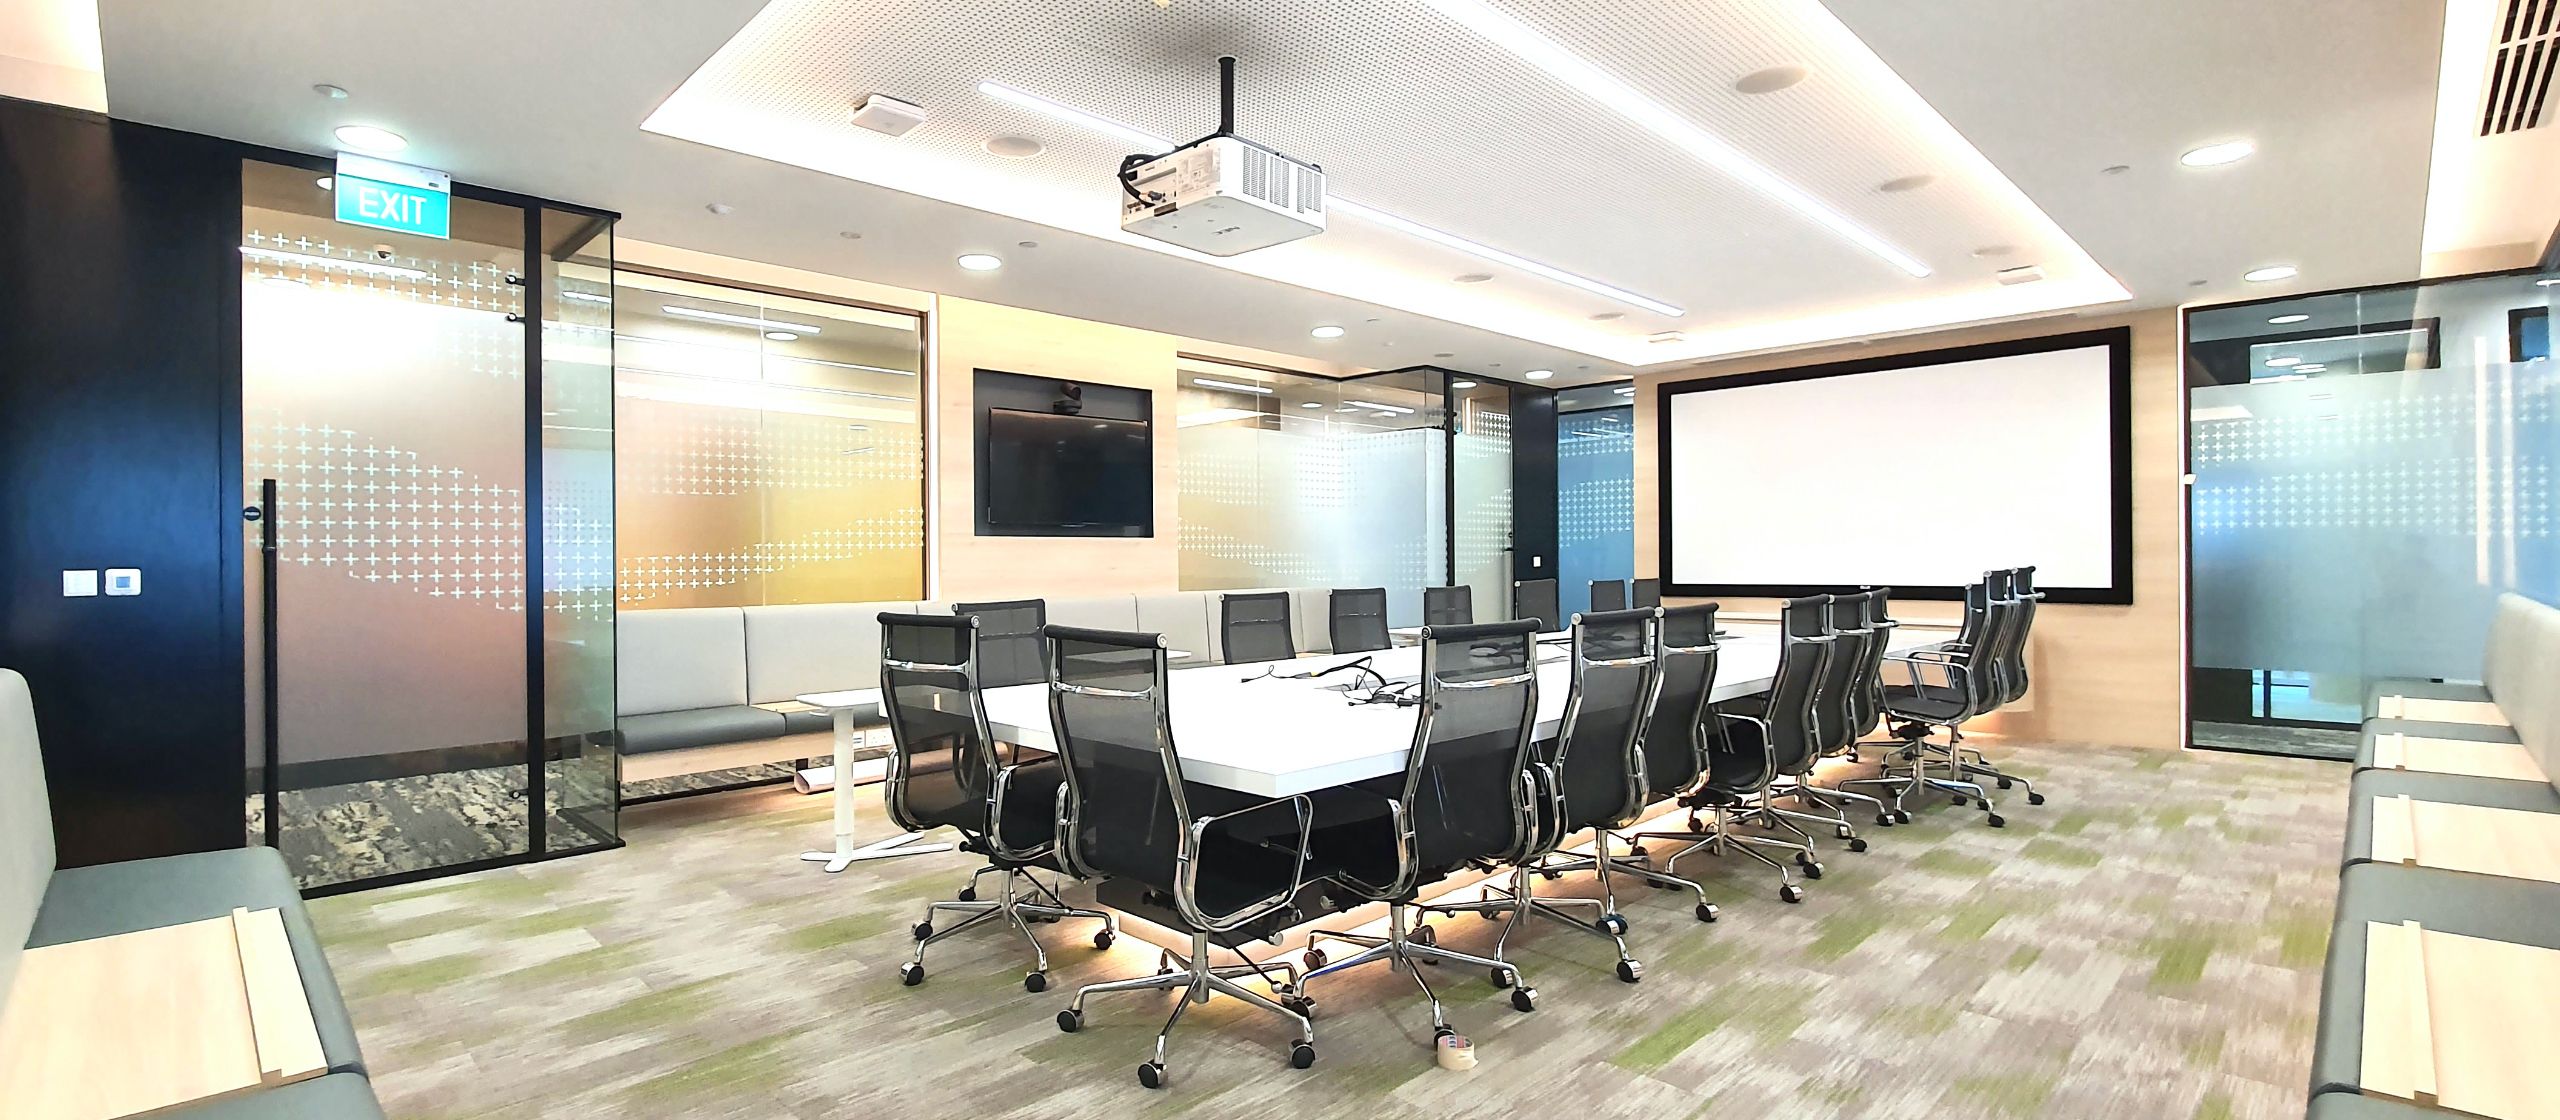 Single Glazed Acoustic Glass Partitioned Meeting Room